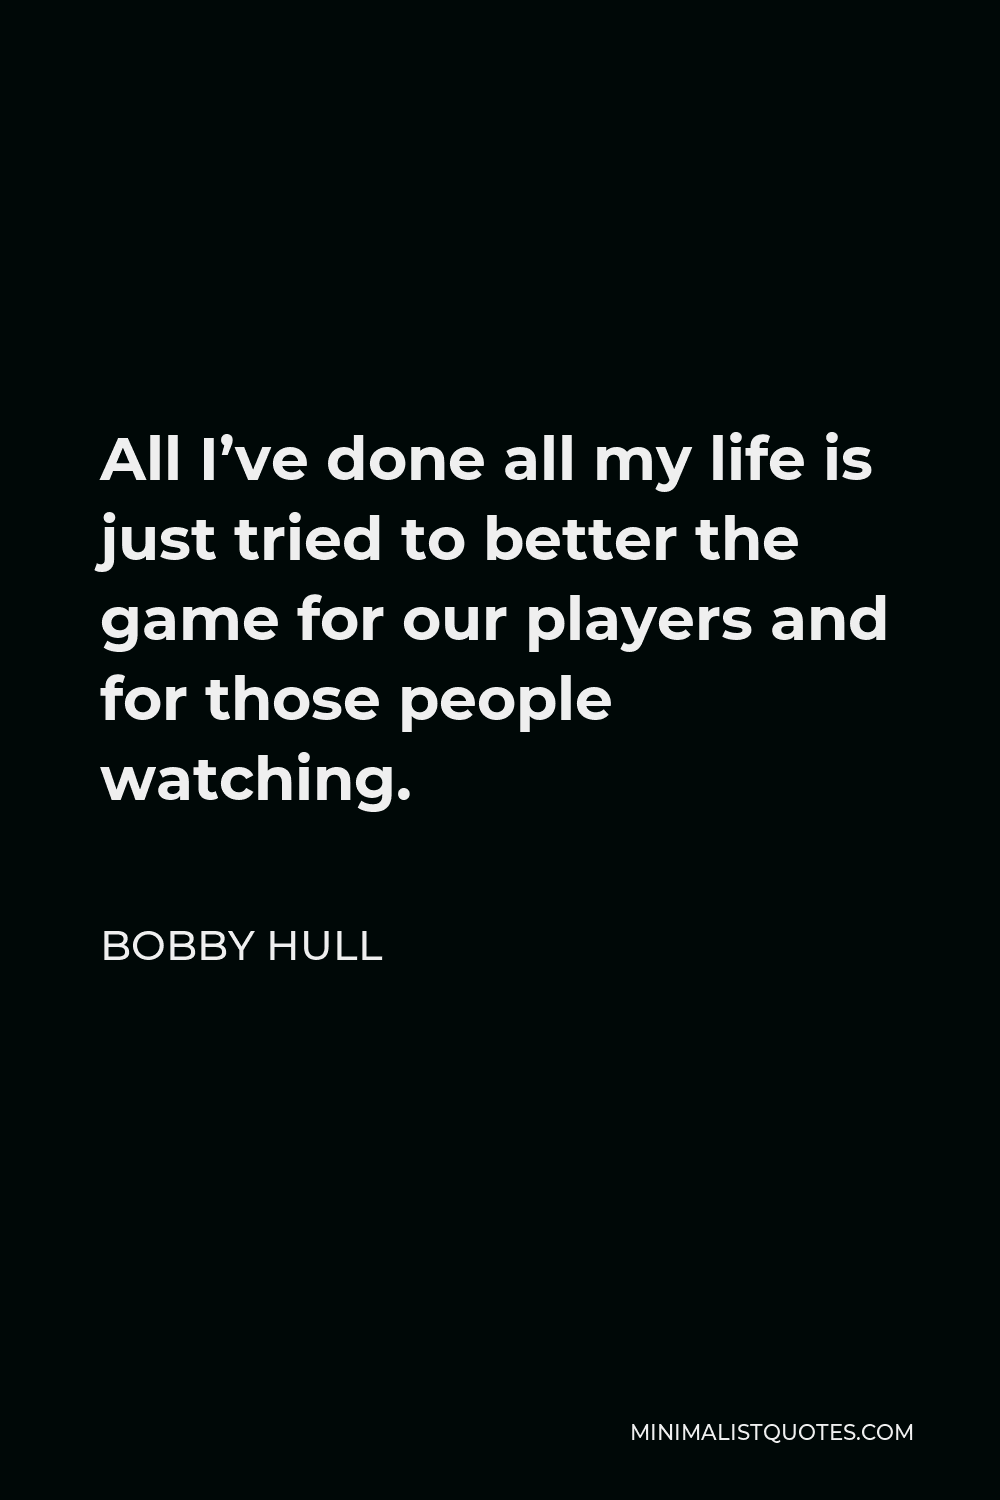 Bobby Hull Quote - All I’ve done all my life is just tried to better the game for our players and for those people watching.